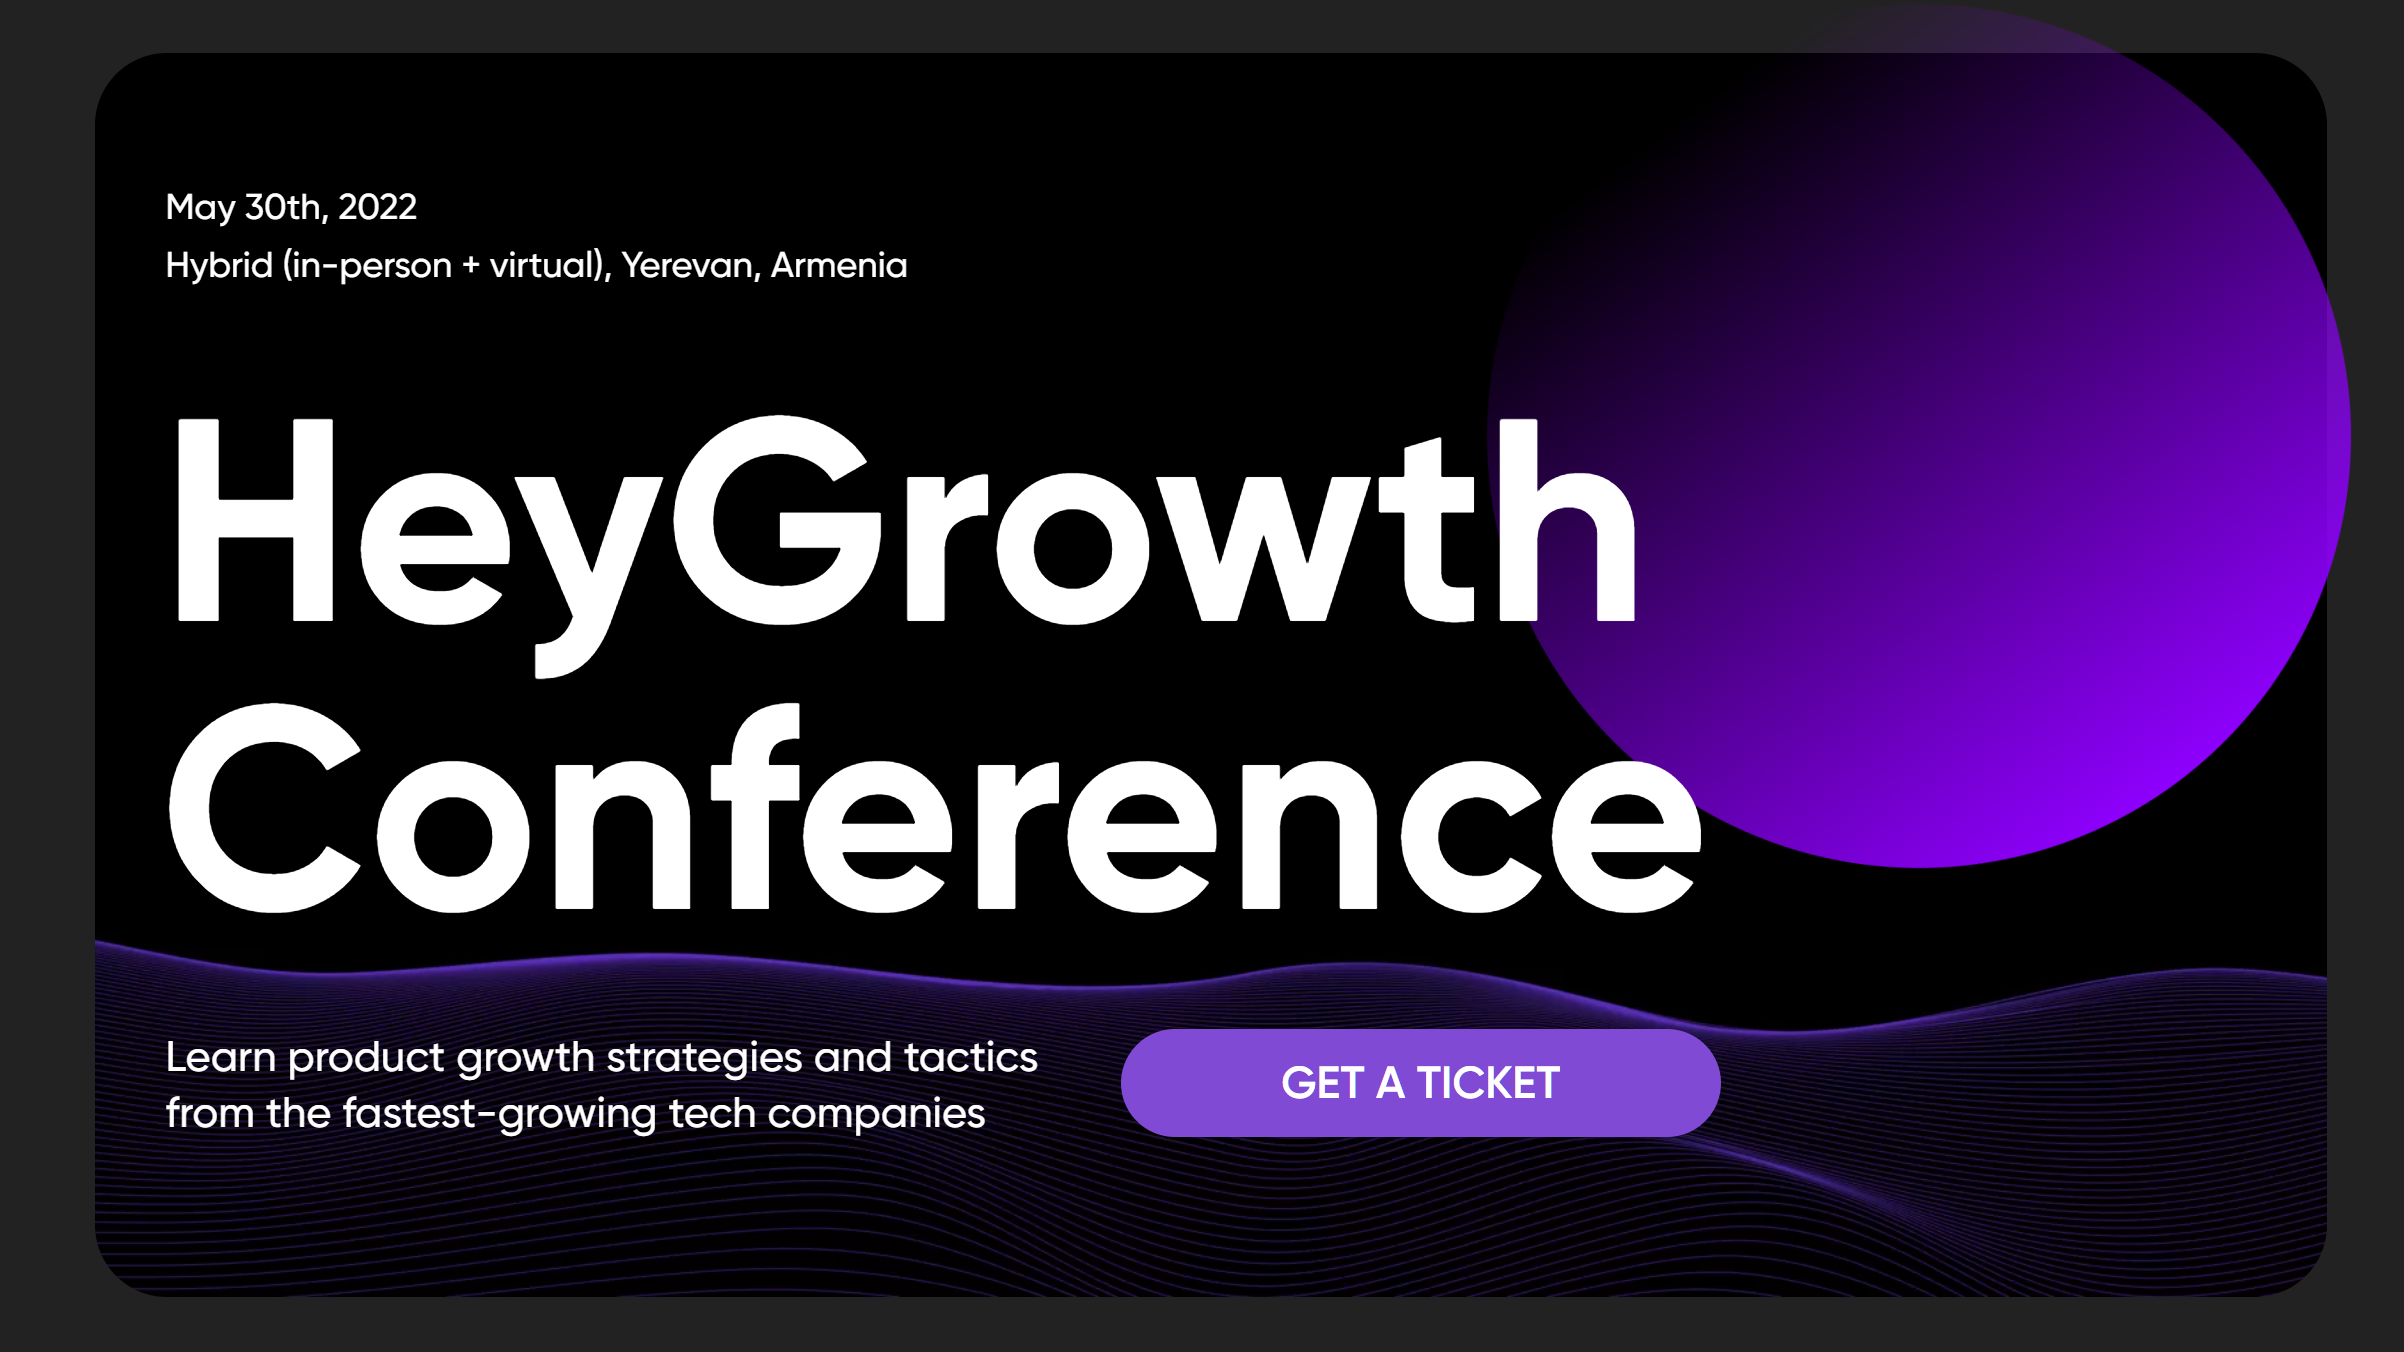 HeyGrowth Conference